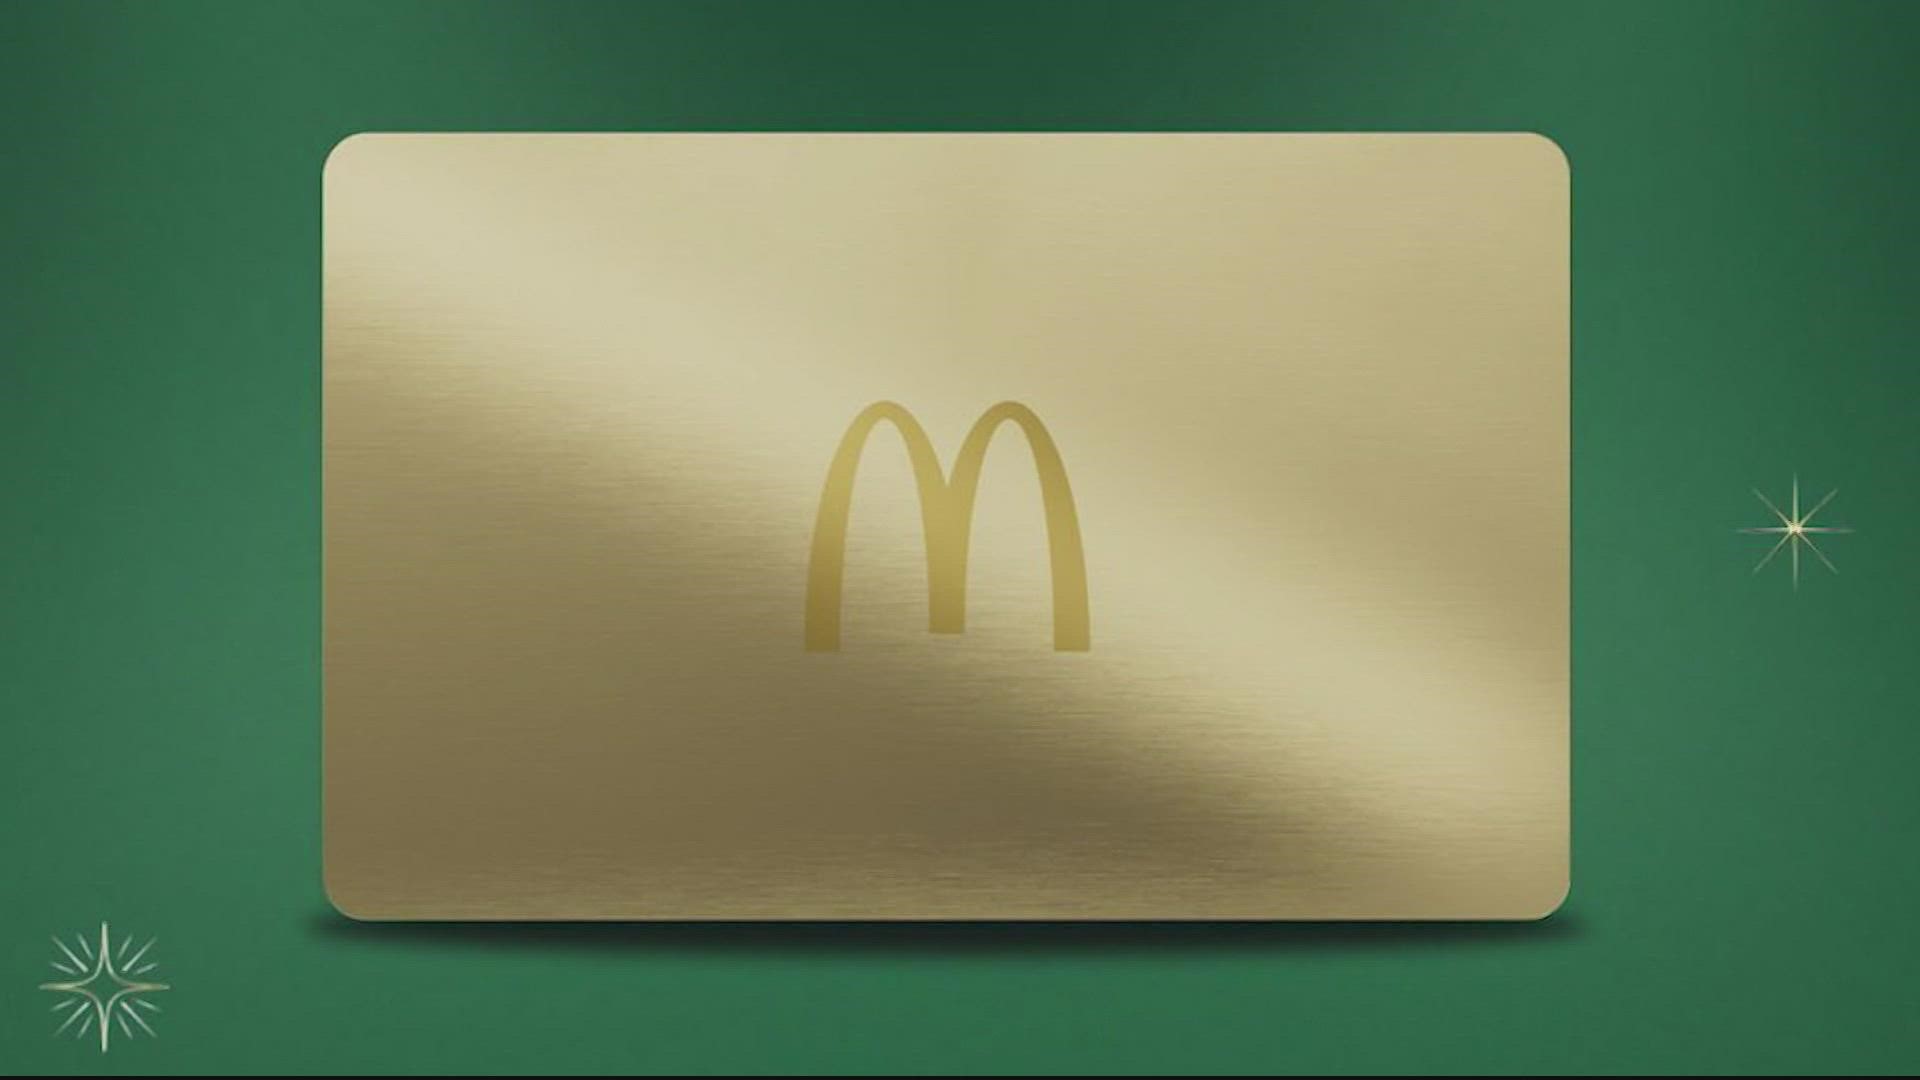 Beginning December 5, every order completed in the McDonald’s app for at least $1 will enter customers into a contest to win a McGold Card.